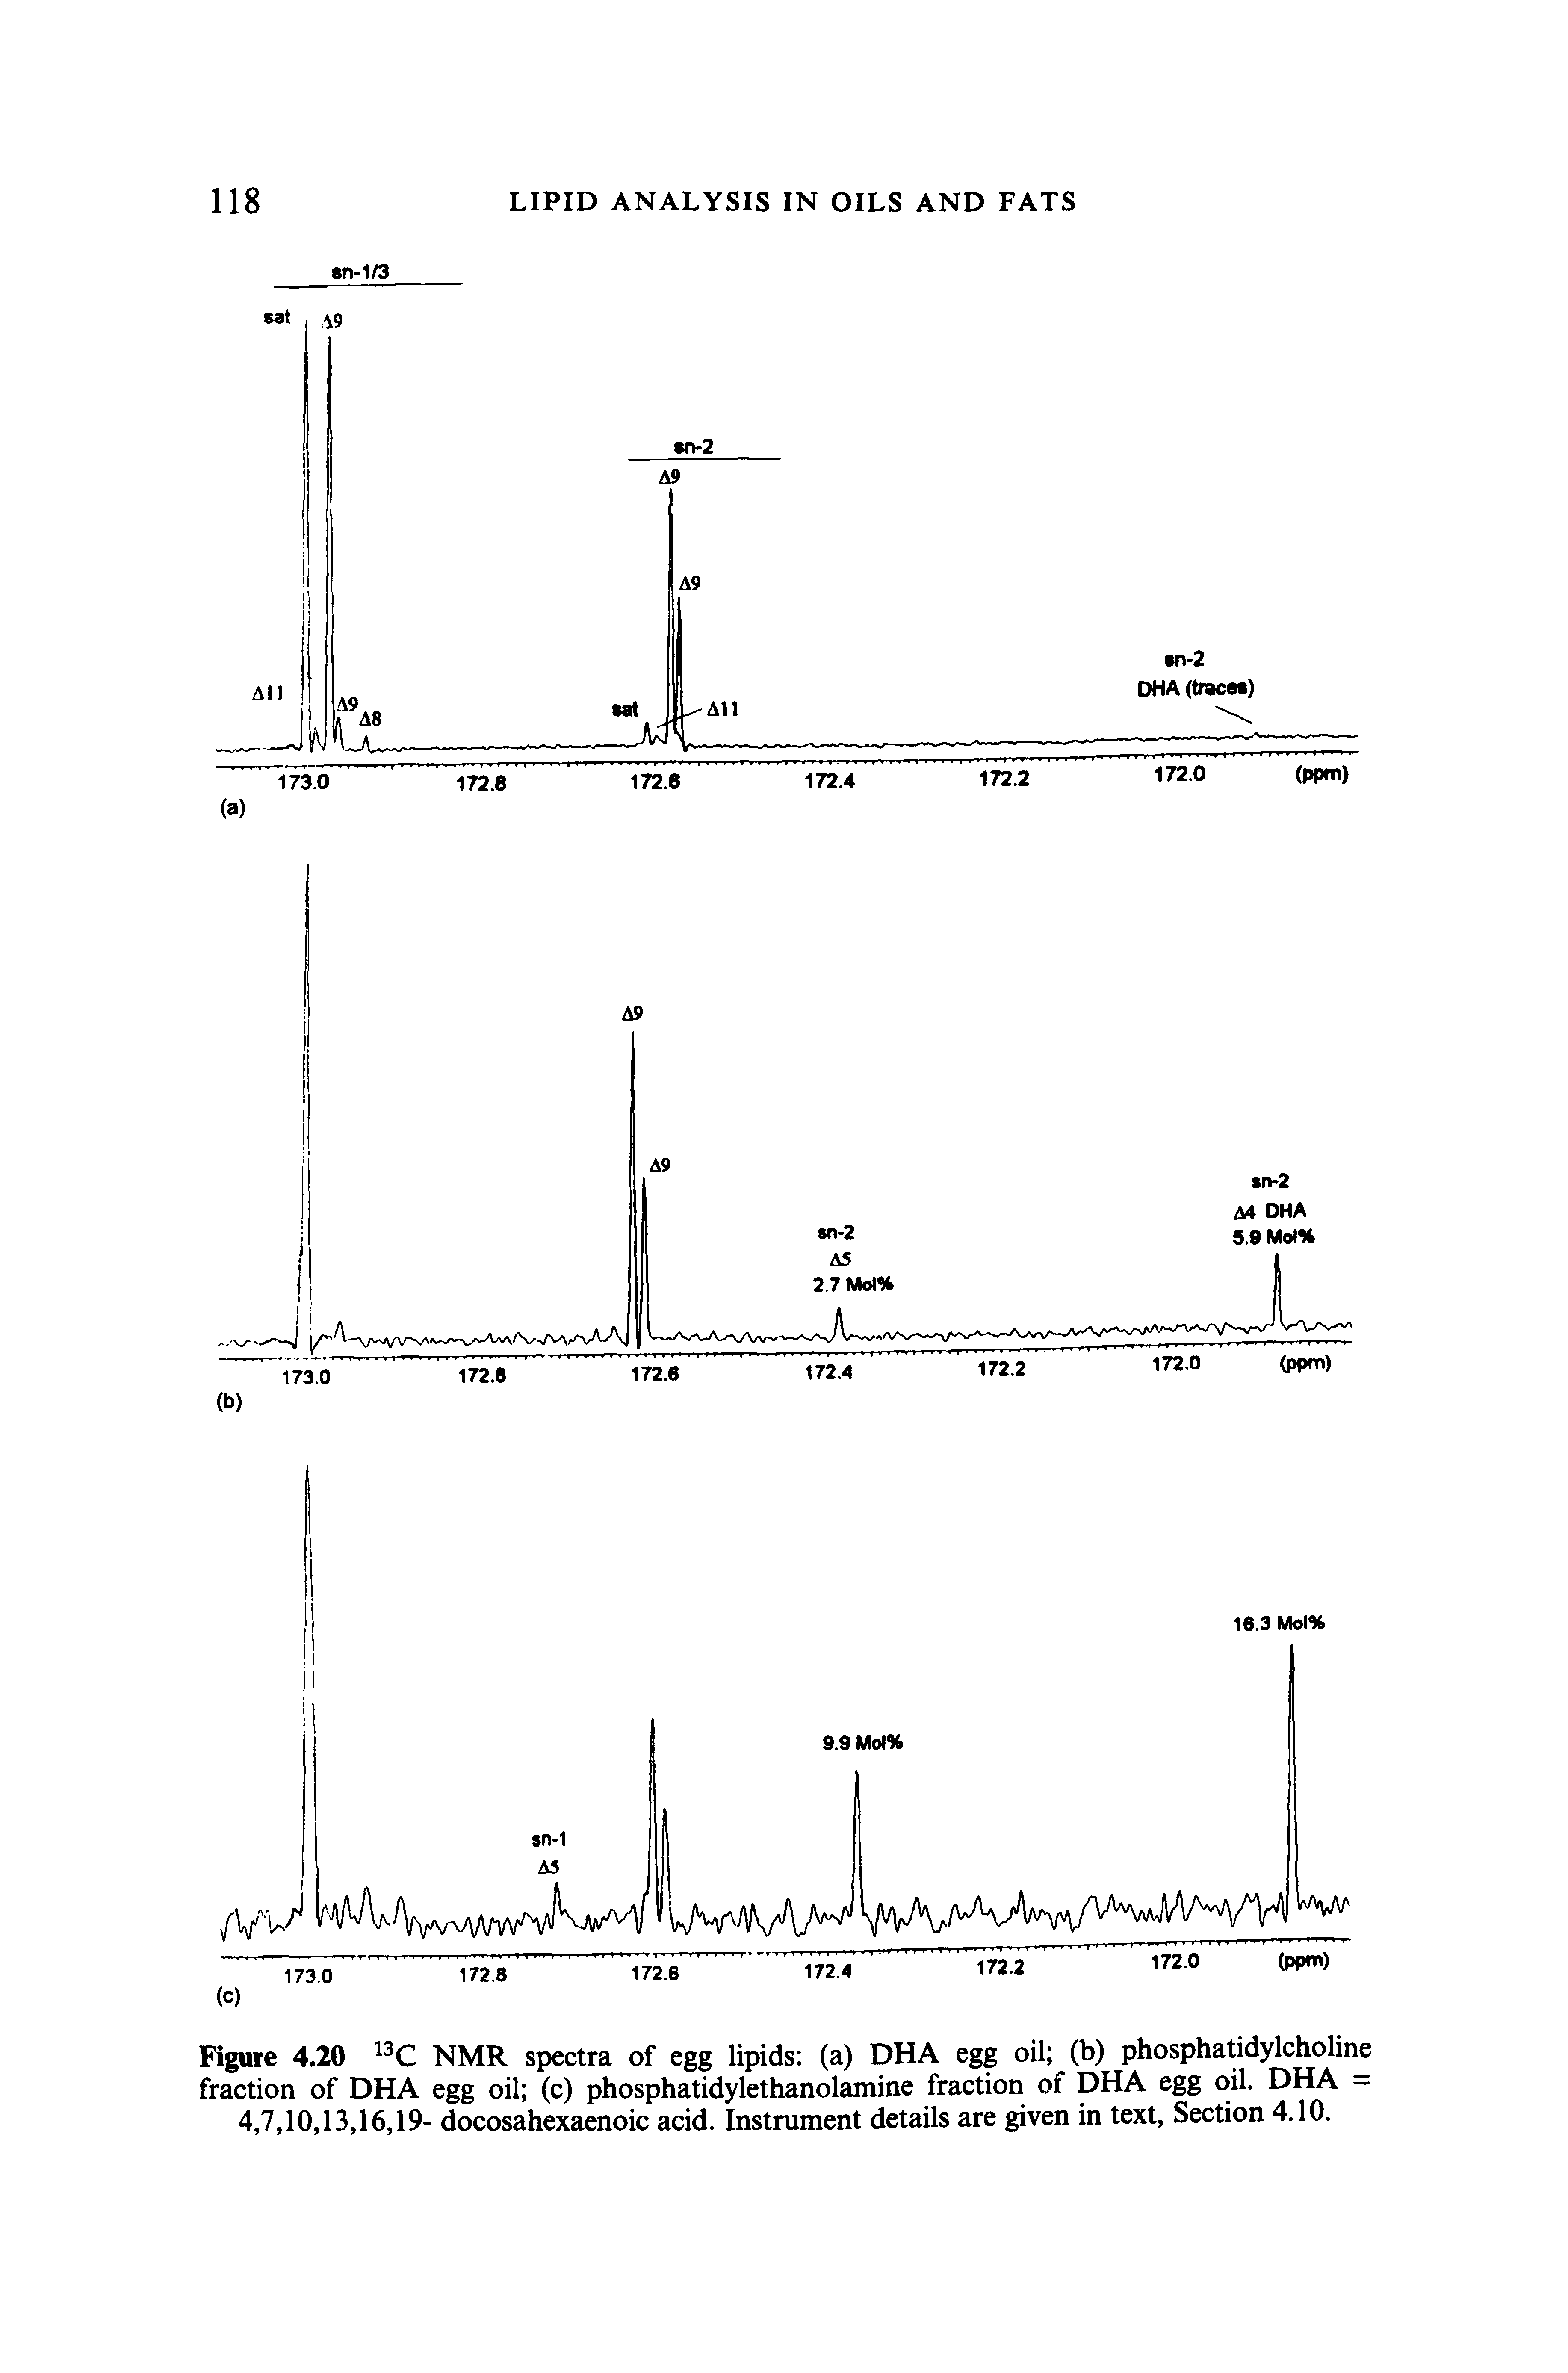 Figure 4.20 NMR spectra of egg lipids (a) DHA egg oil (b) phosphatidylcholine fraction of DHA egg oil (c) phosphatidylethanolamine fraction of DHA egg oil. DHA = 4,7,10,13,16,19- docosahexaenoic acid. Instrument details are given in text. Section 4.10.